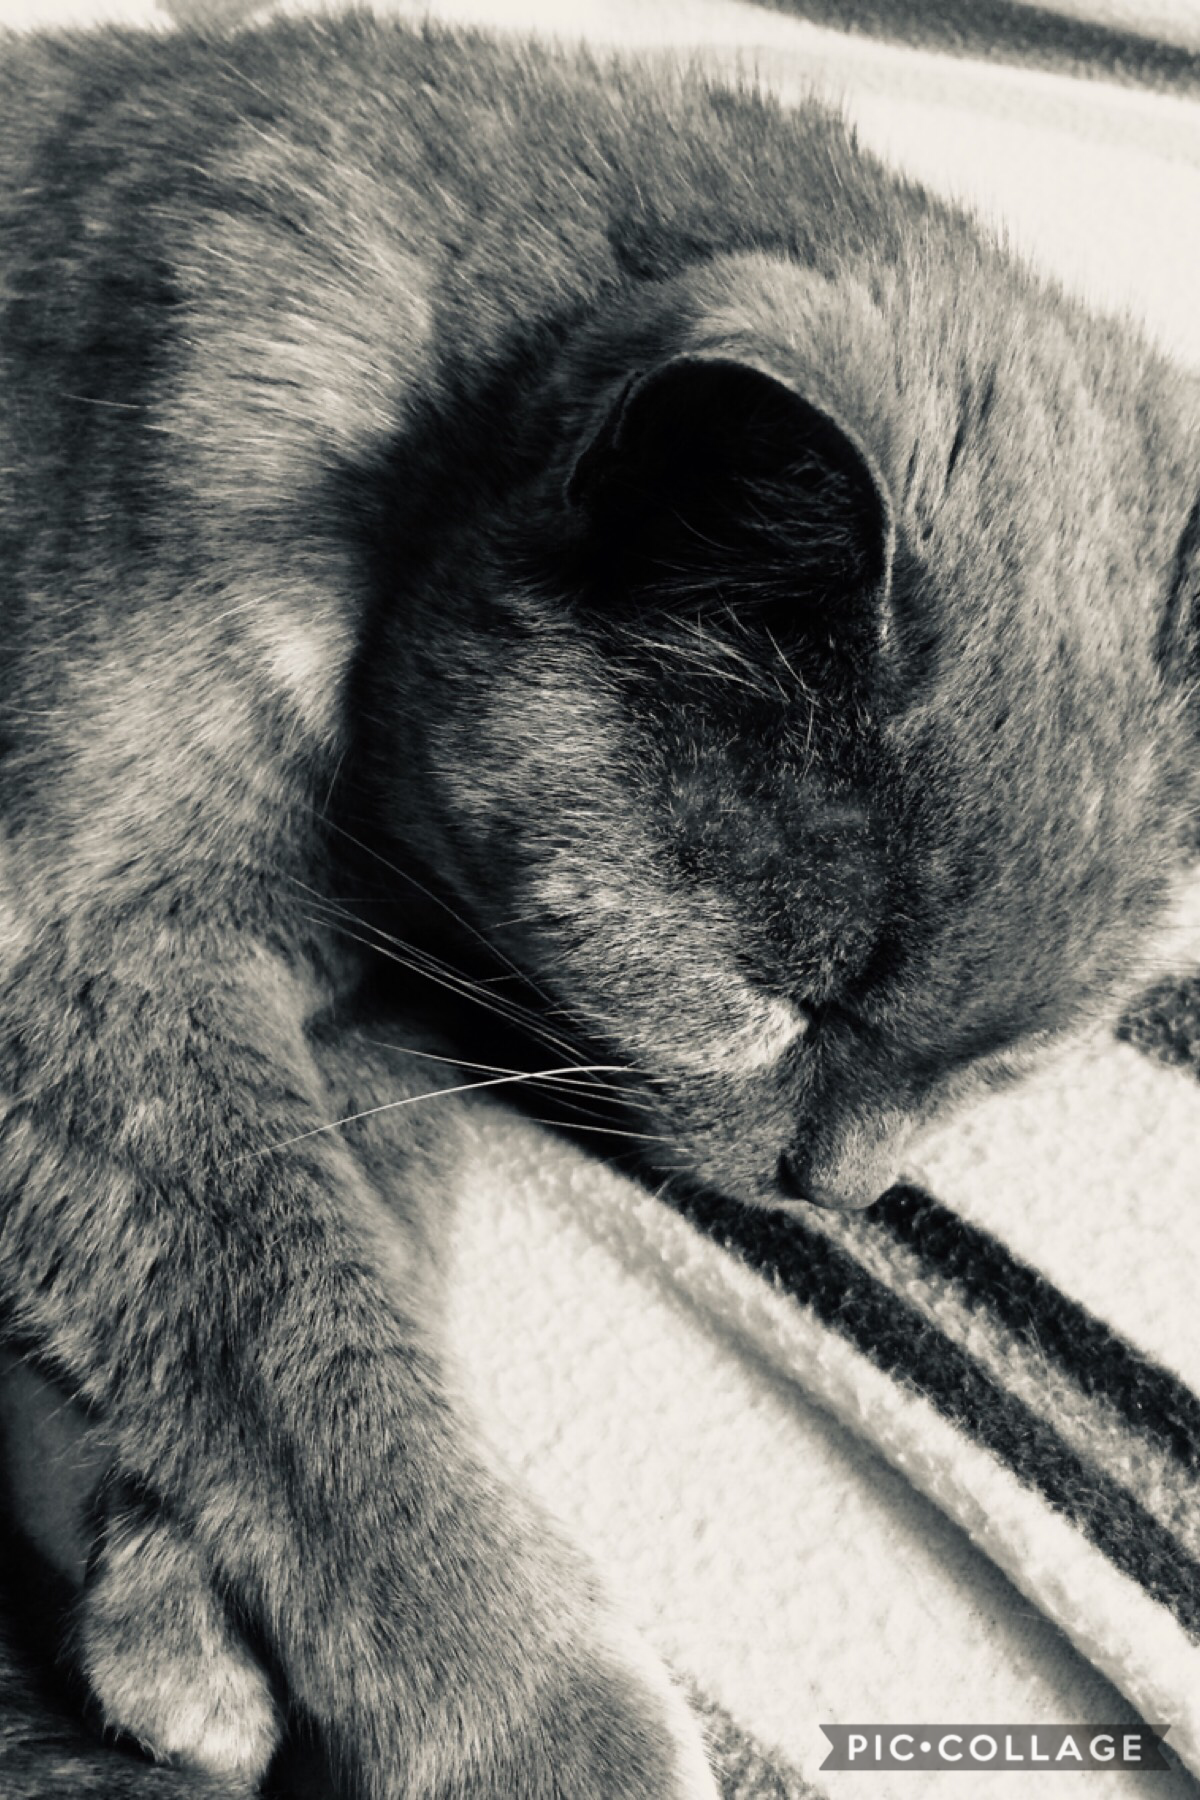 Picture #6! This is my cat, not saying it’s name because... well I’ve got my reasons😂 anyway she’s really cute & OLD! Turning 19 this year! Goodbyeee!